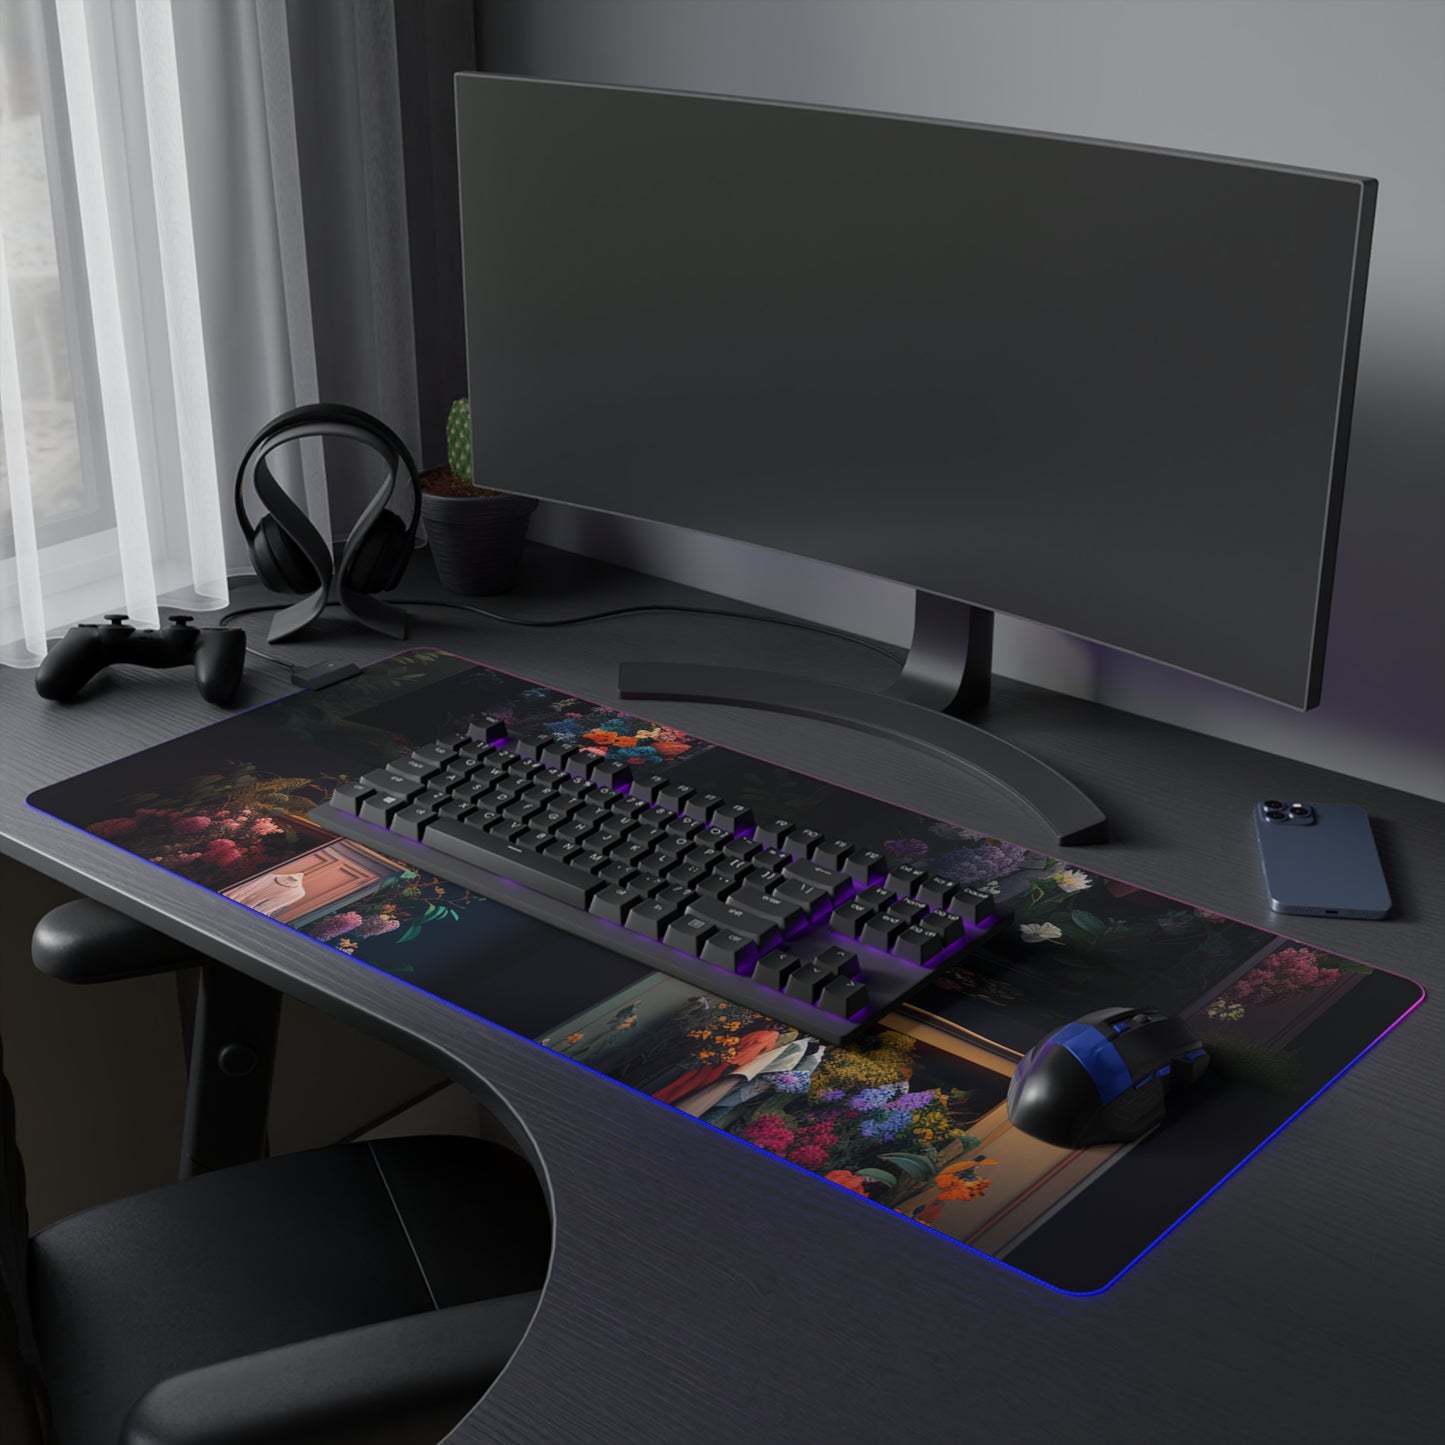 LED Gaming Mouse Pad A Wardrobe Surrounded by Flowers 5